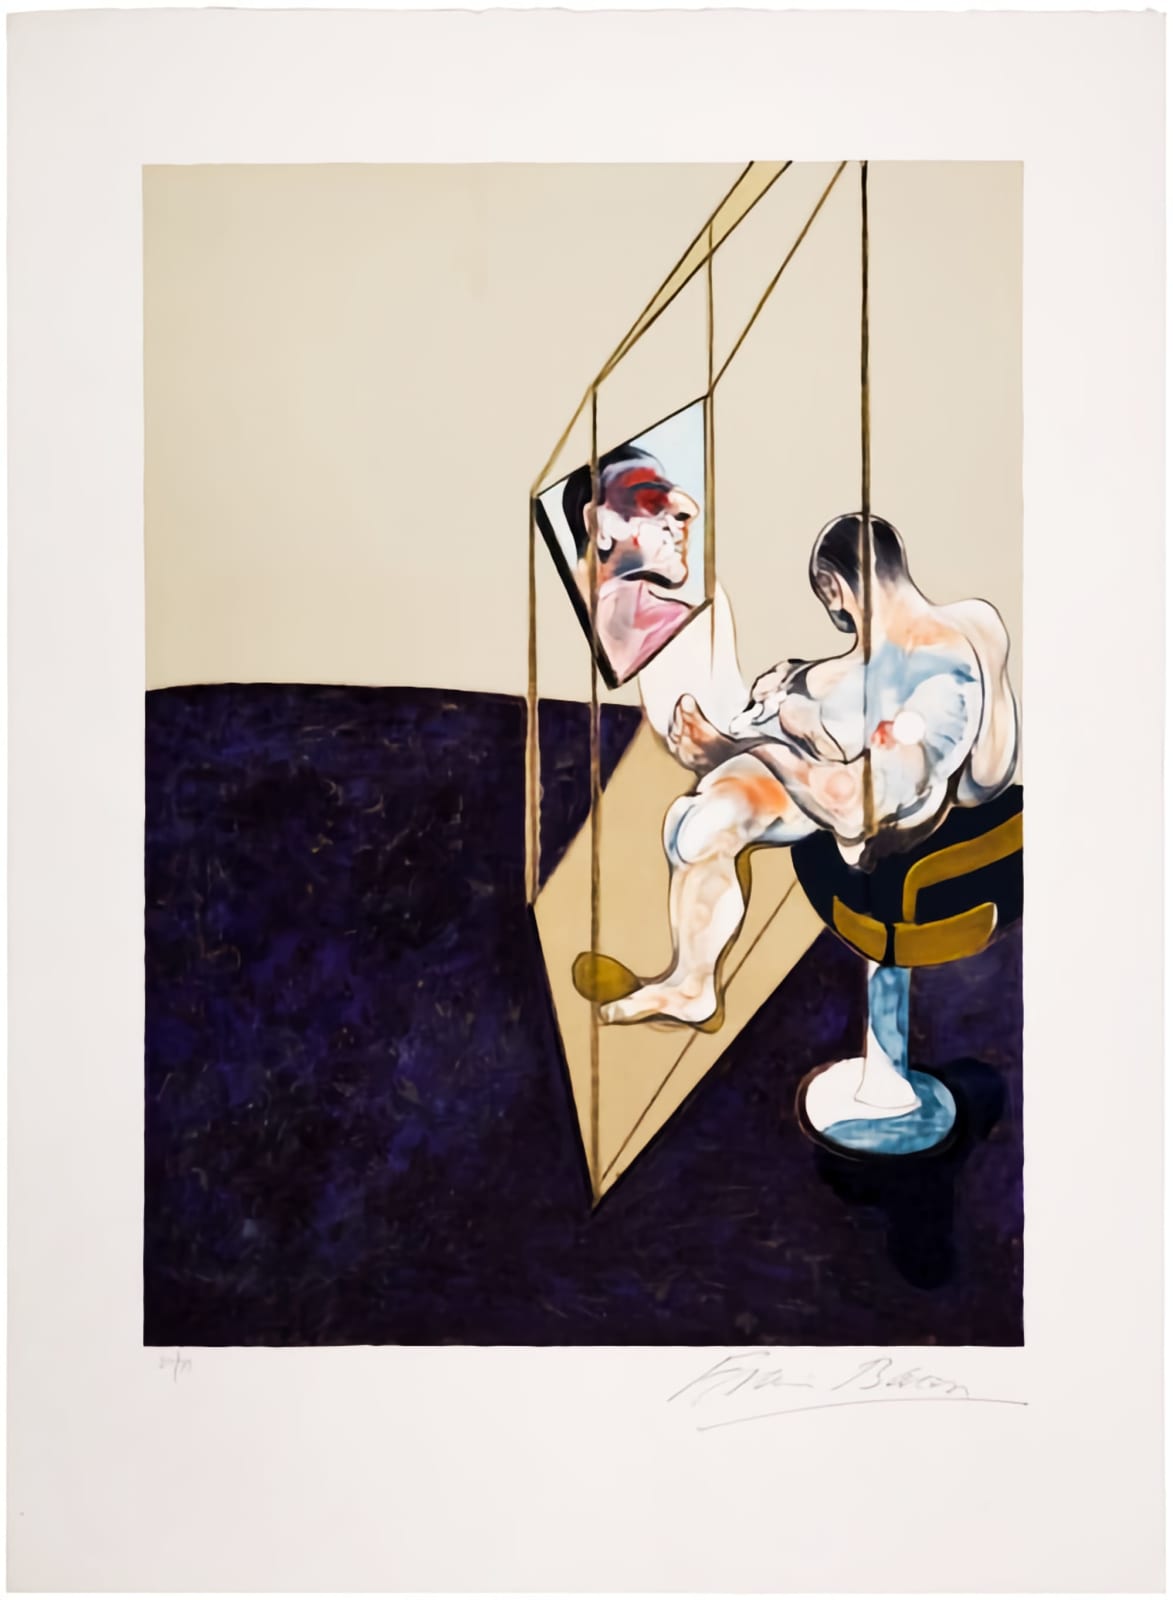 Francis Bacon, Three Studies of Male Back (One Work - night hand panel of the triptych), 1987